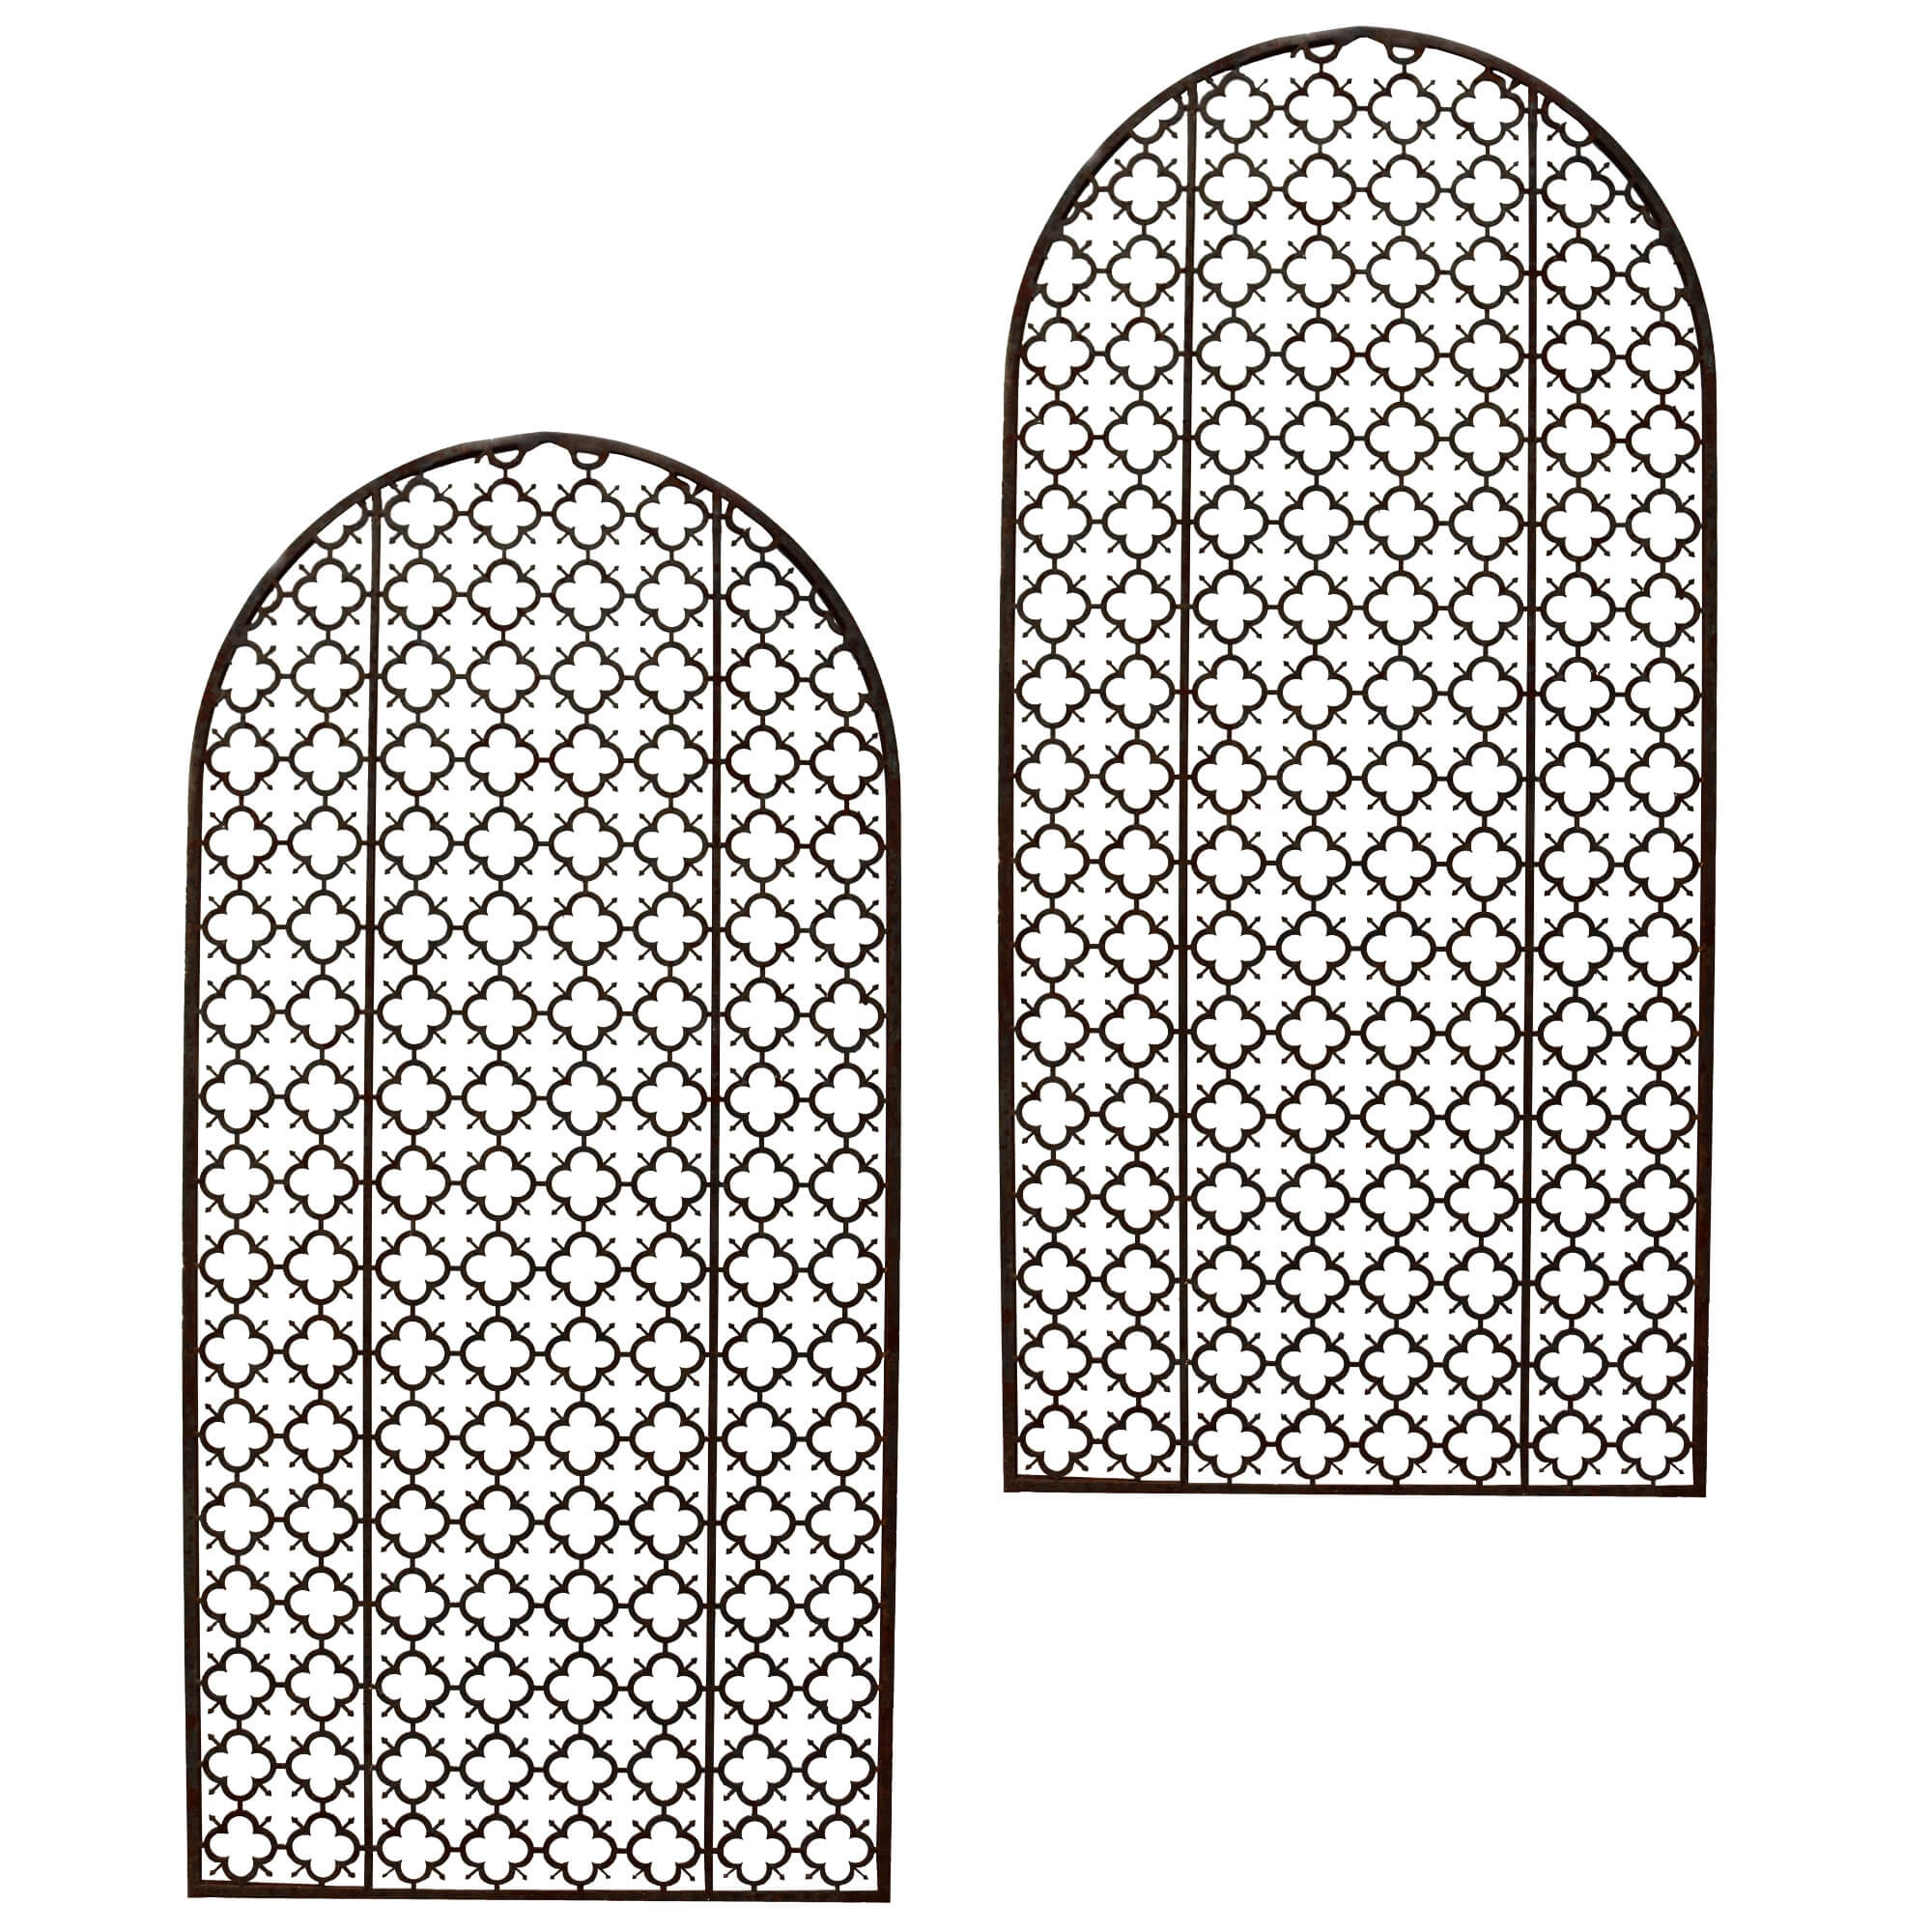 Pair of Large Arched Reclaimed Garden or Trellis Panels